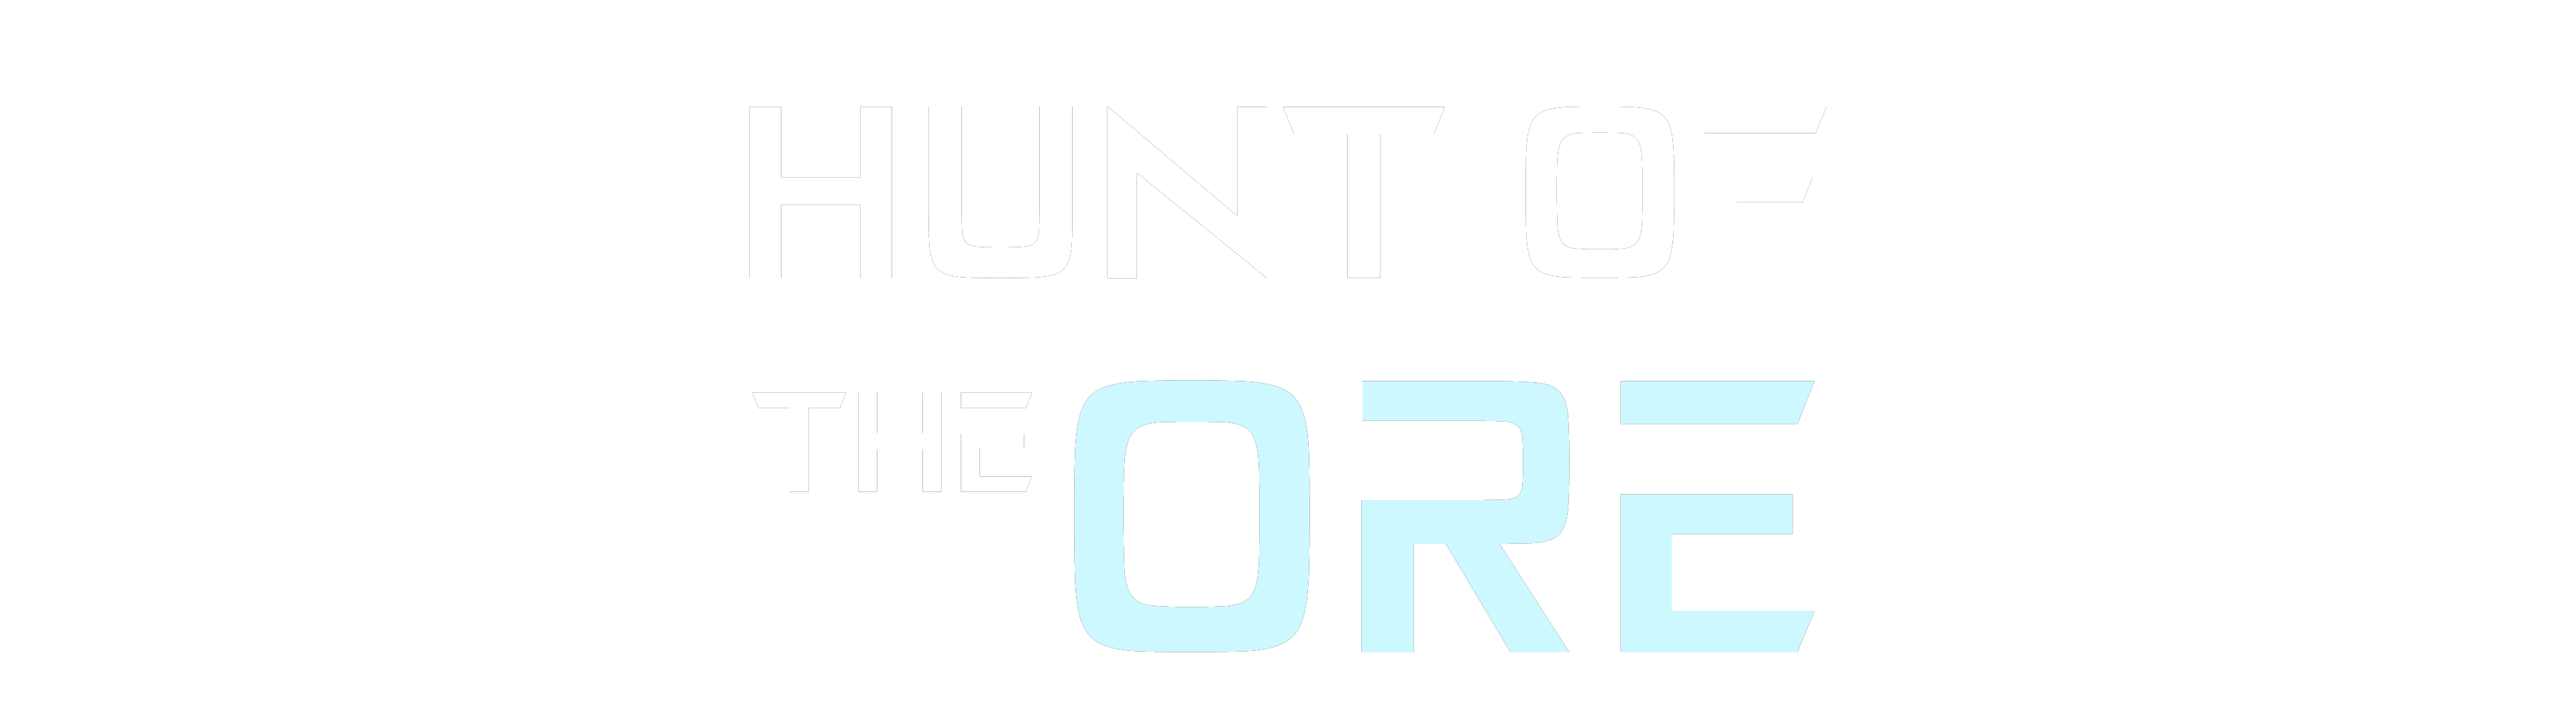 Hunt of the ore